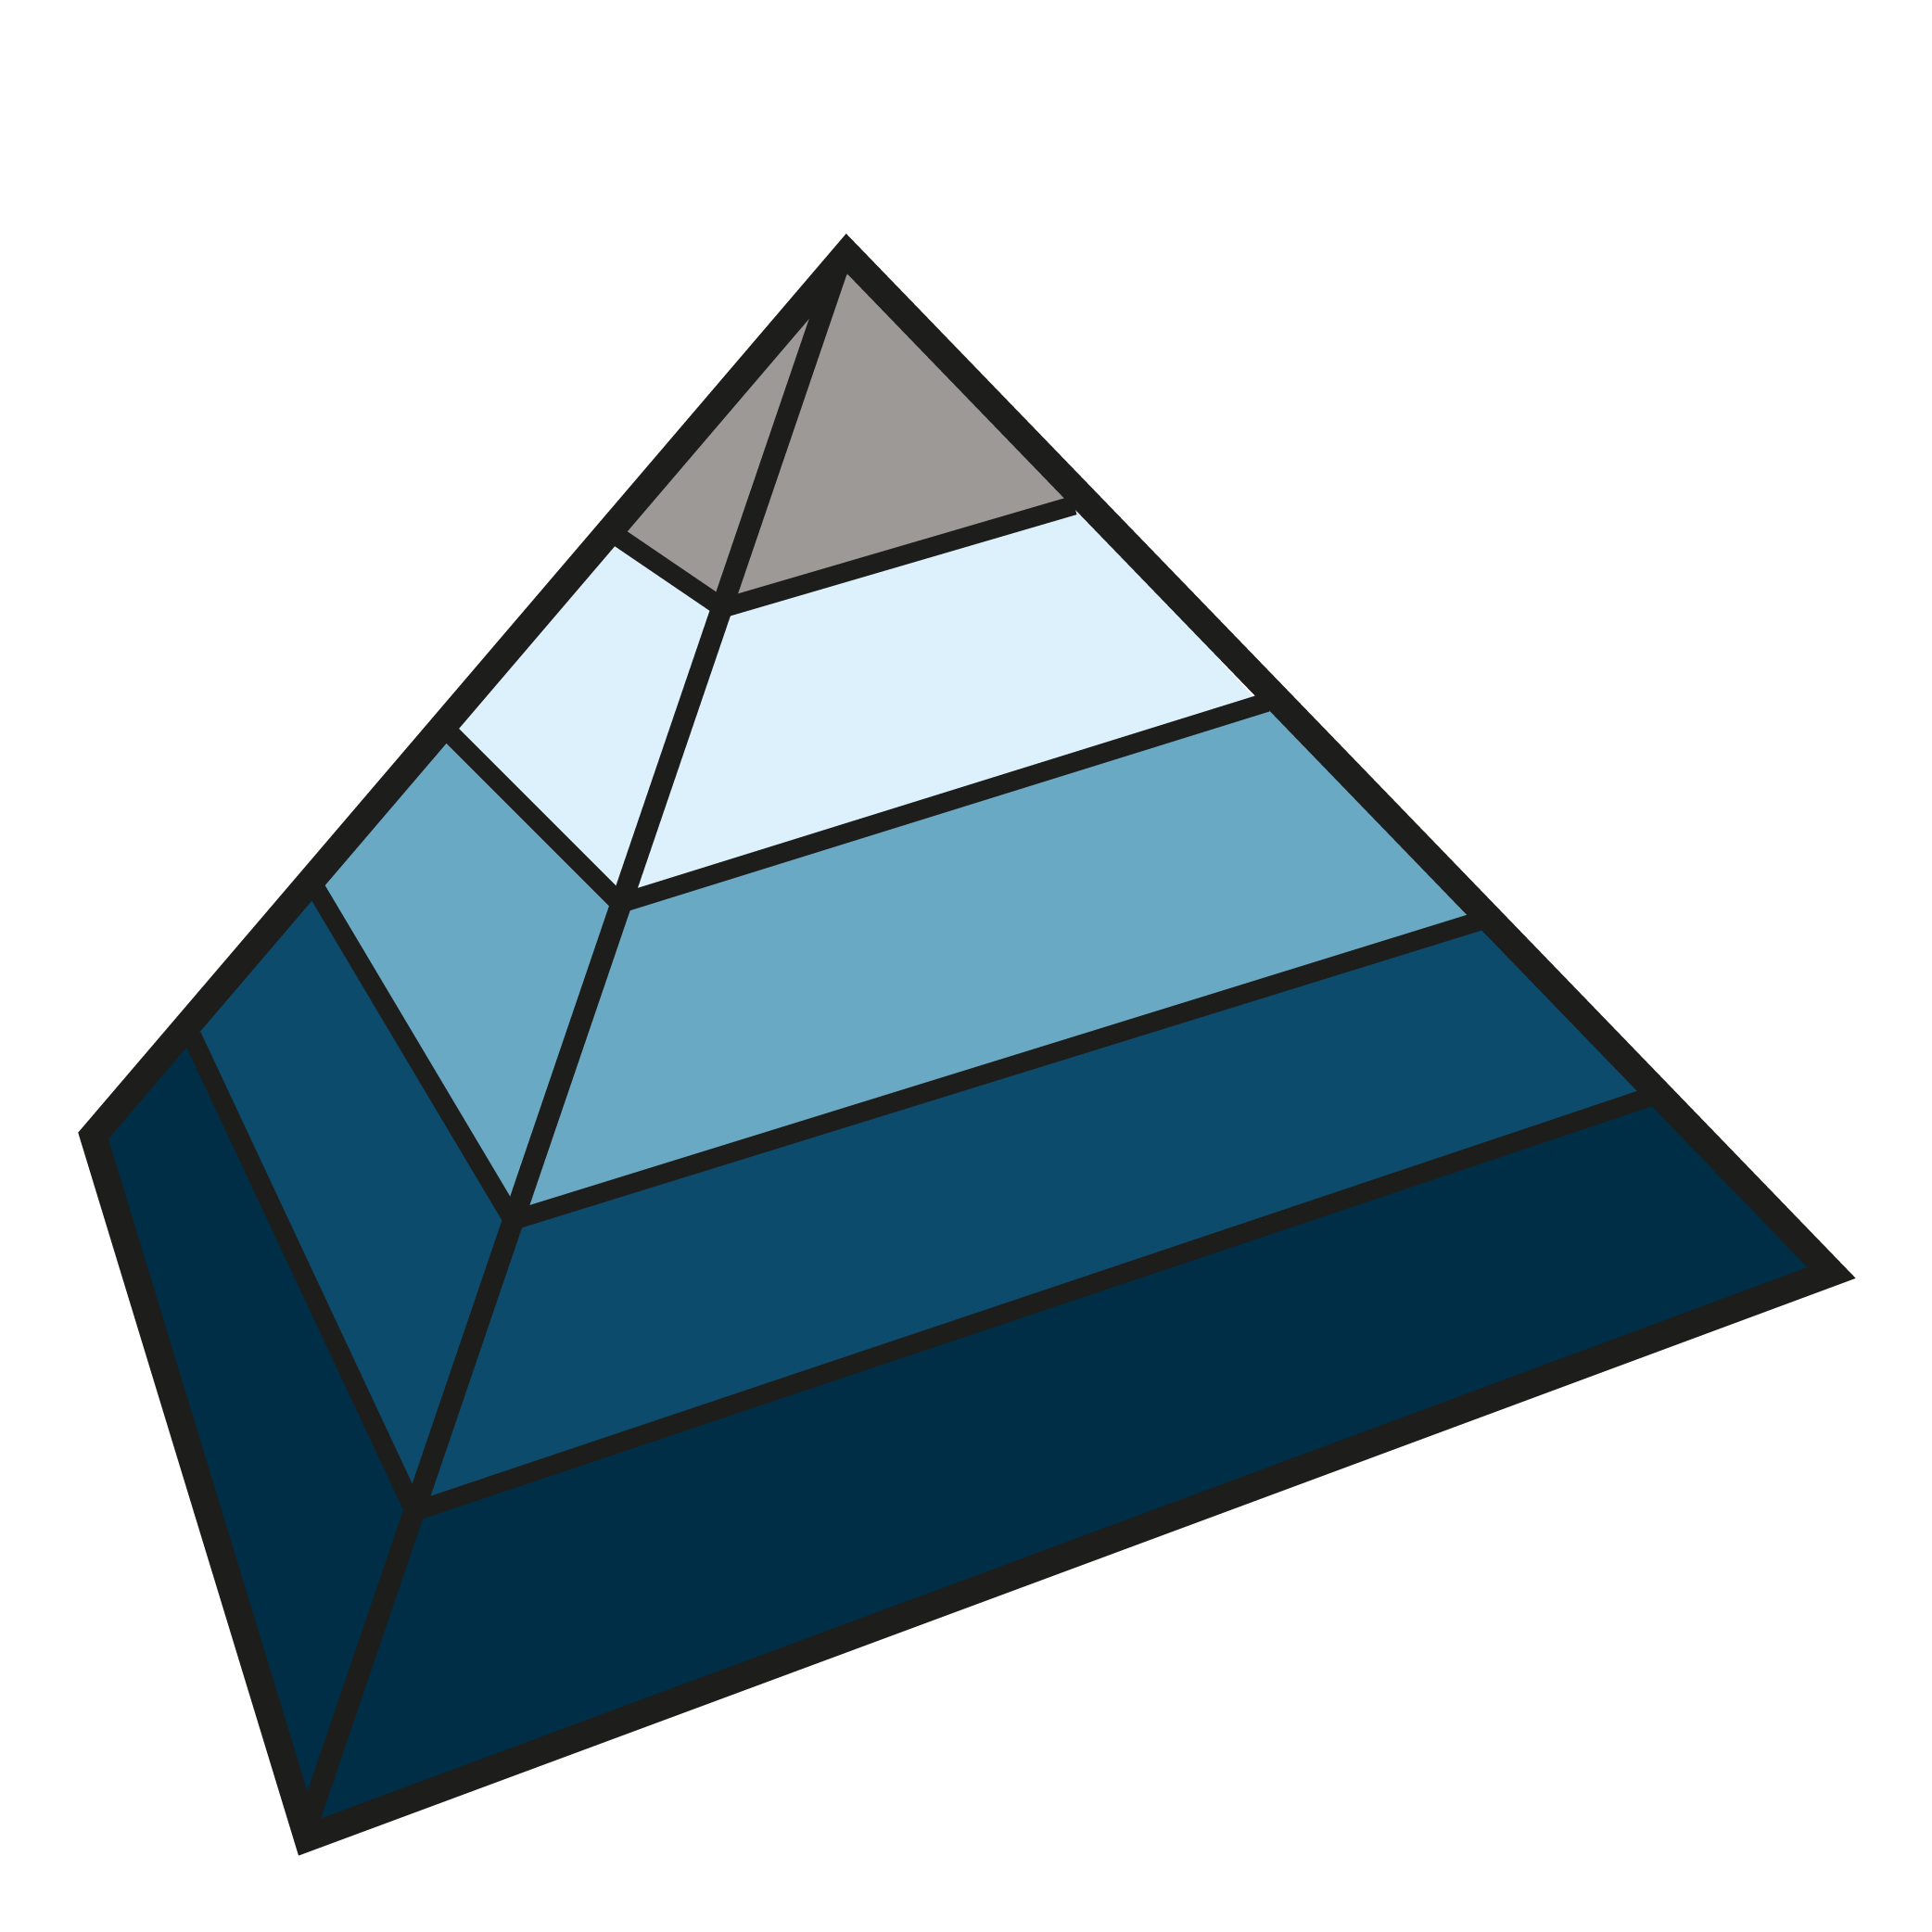 an illustration of a blue 3d hierarchal pyramid